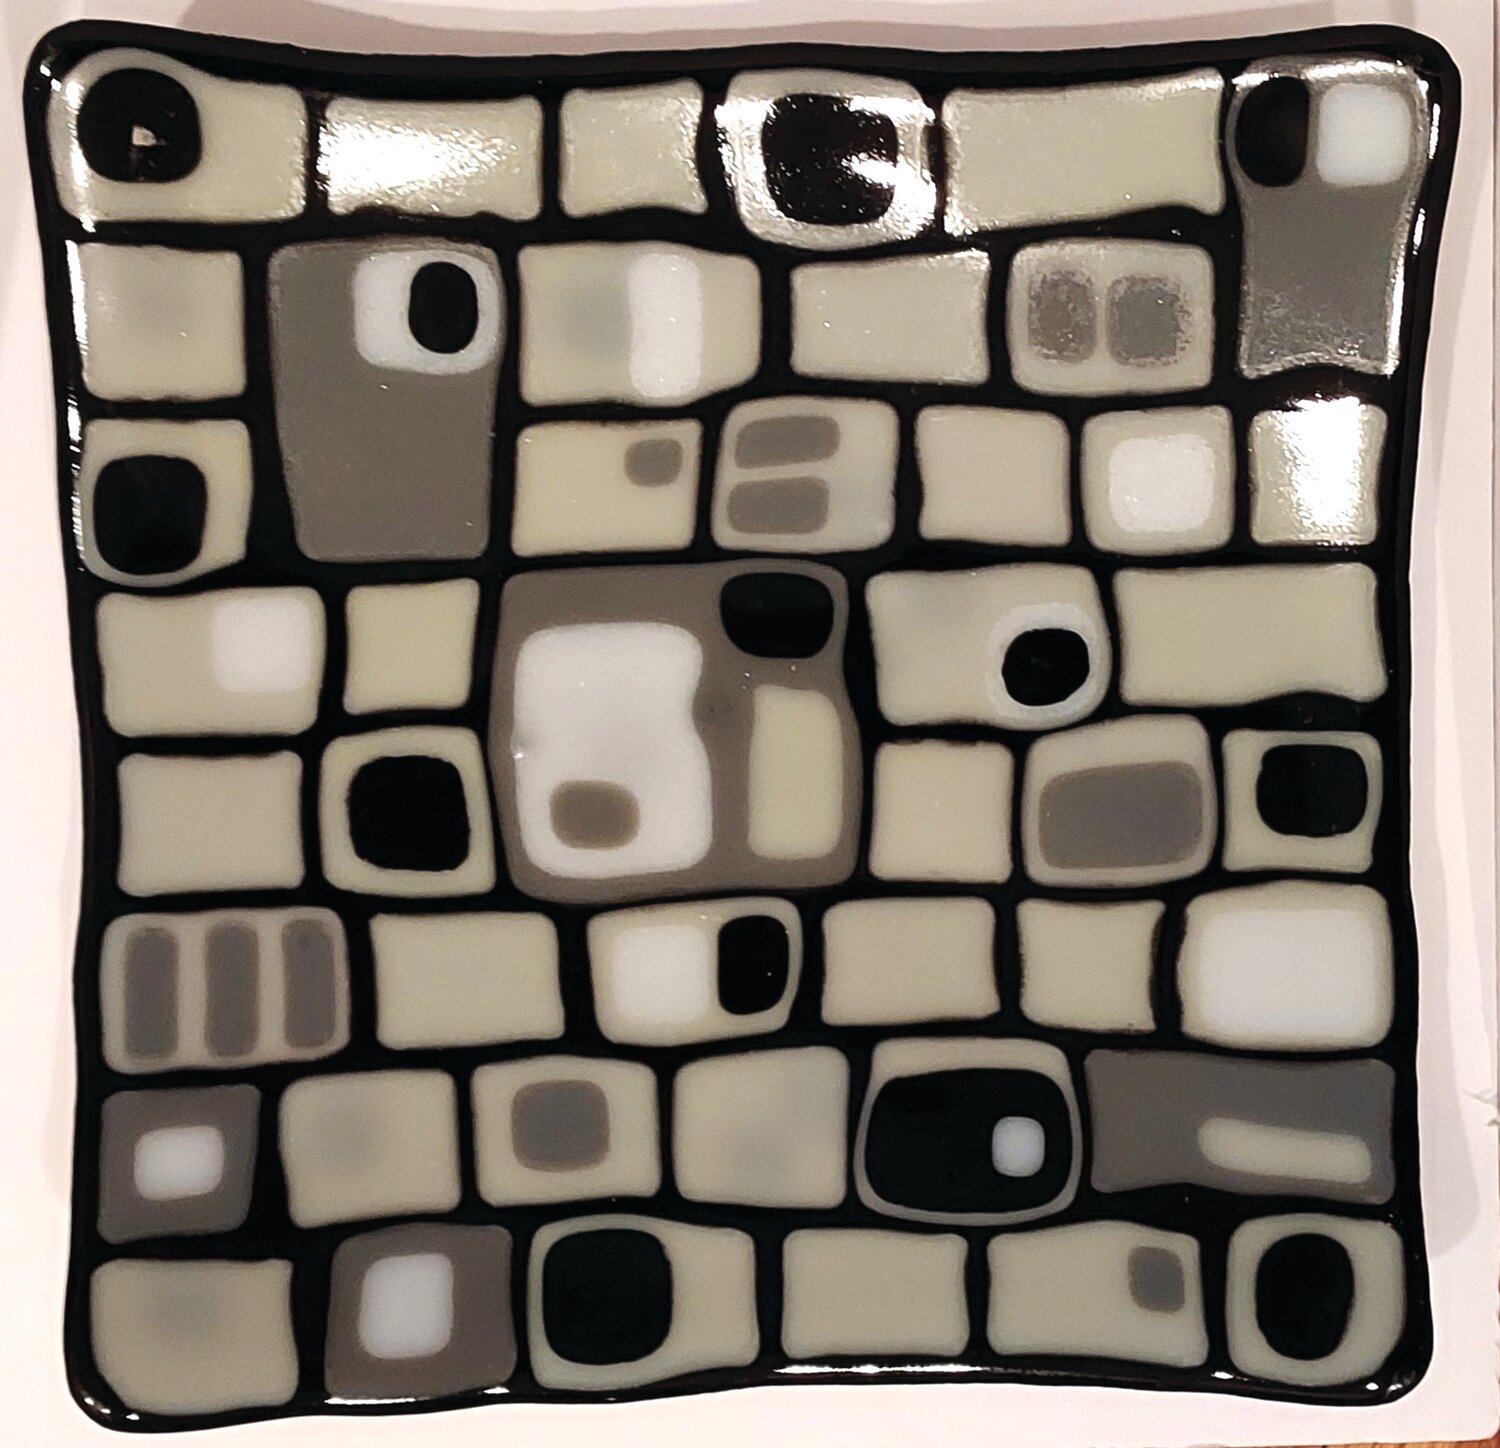 “Neither Black nor White” is a glass plate by Nancy Allen.